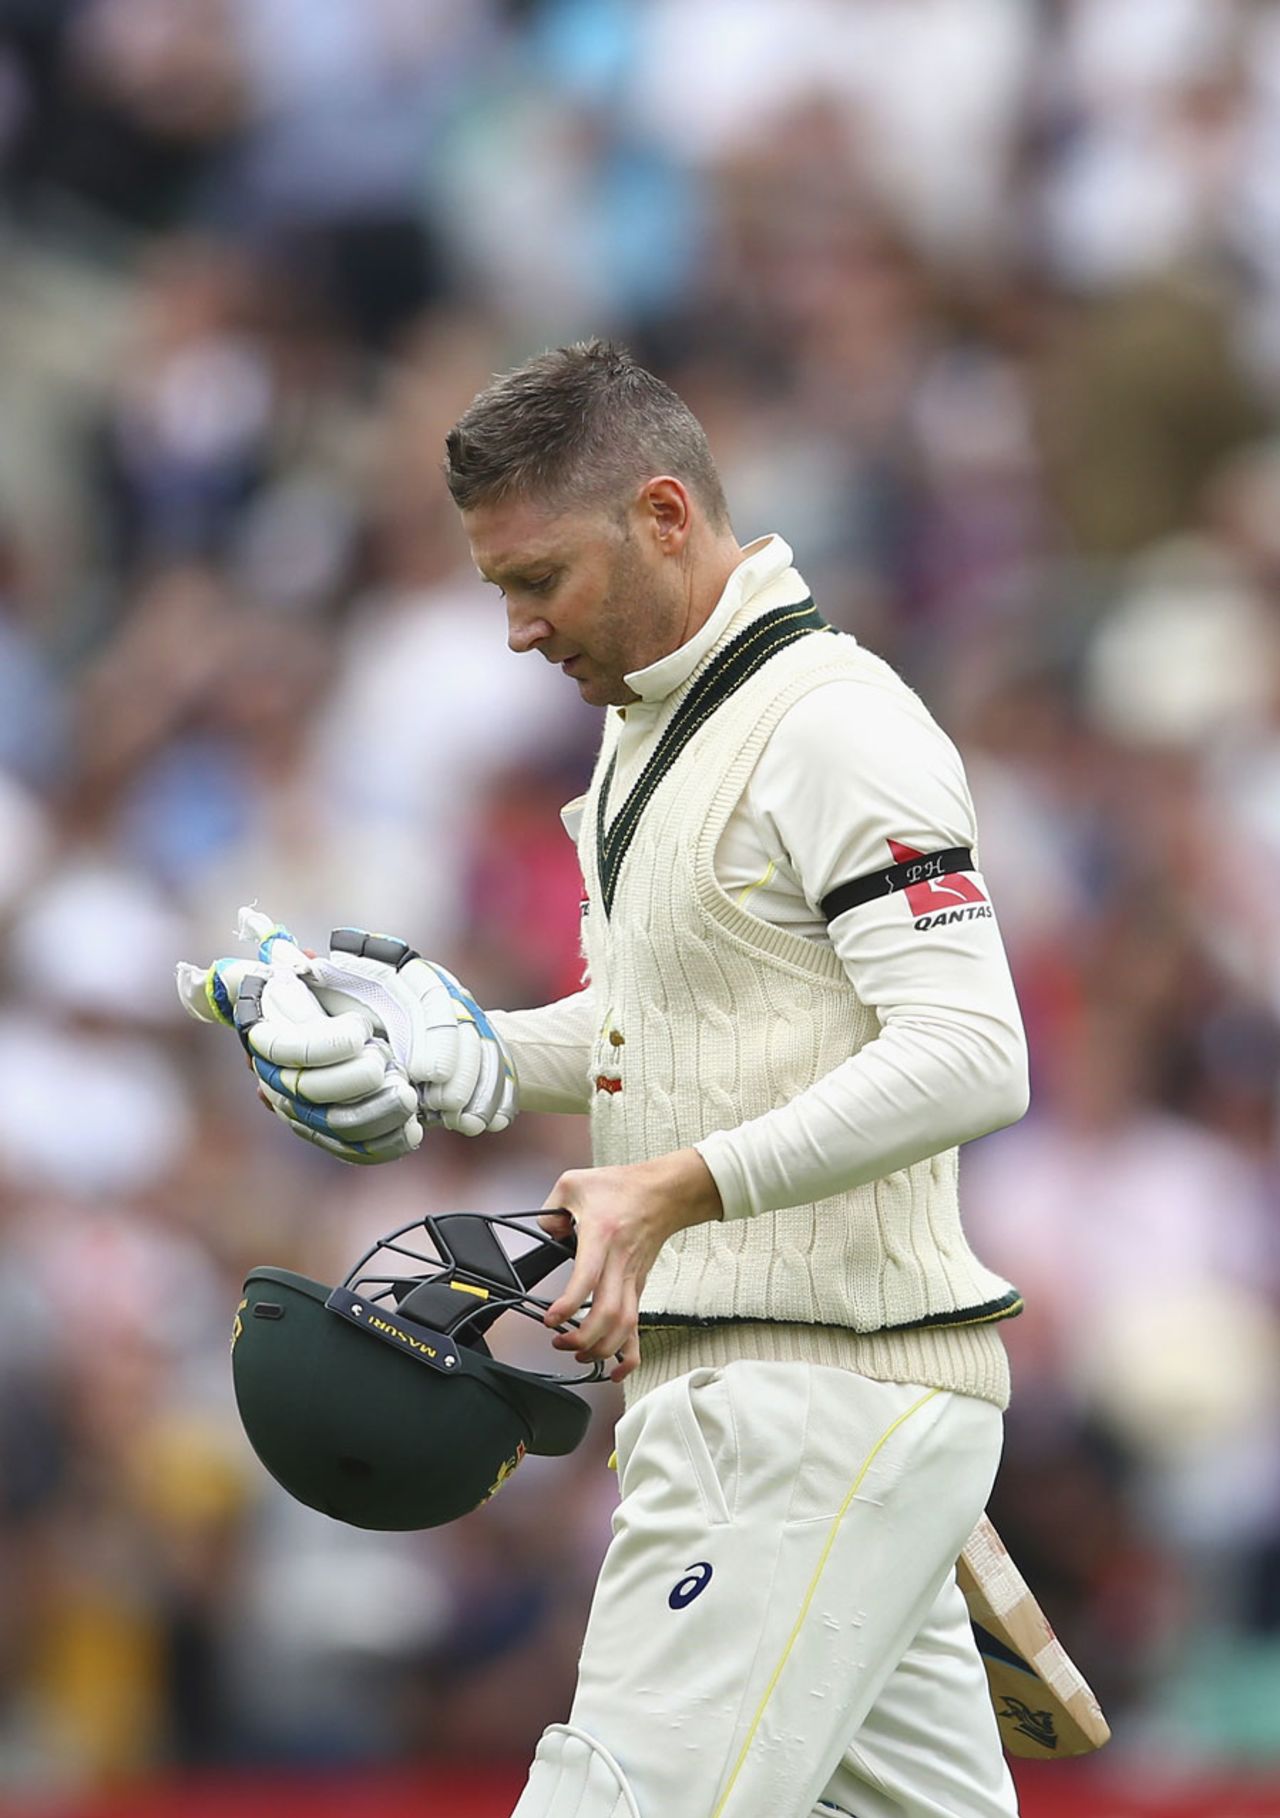 Michael Clarke walks off after being dismissed for 15, England v Australia, 5th Investec Ashes Test, The Oval, August 20, 2015